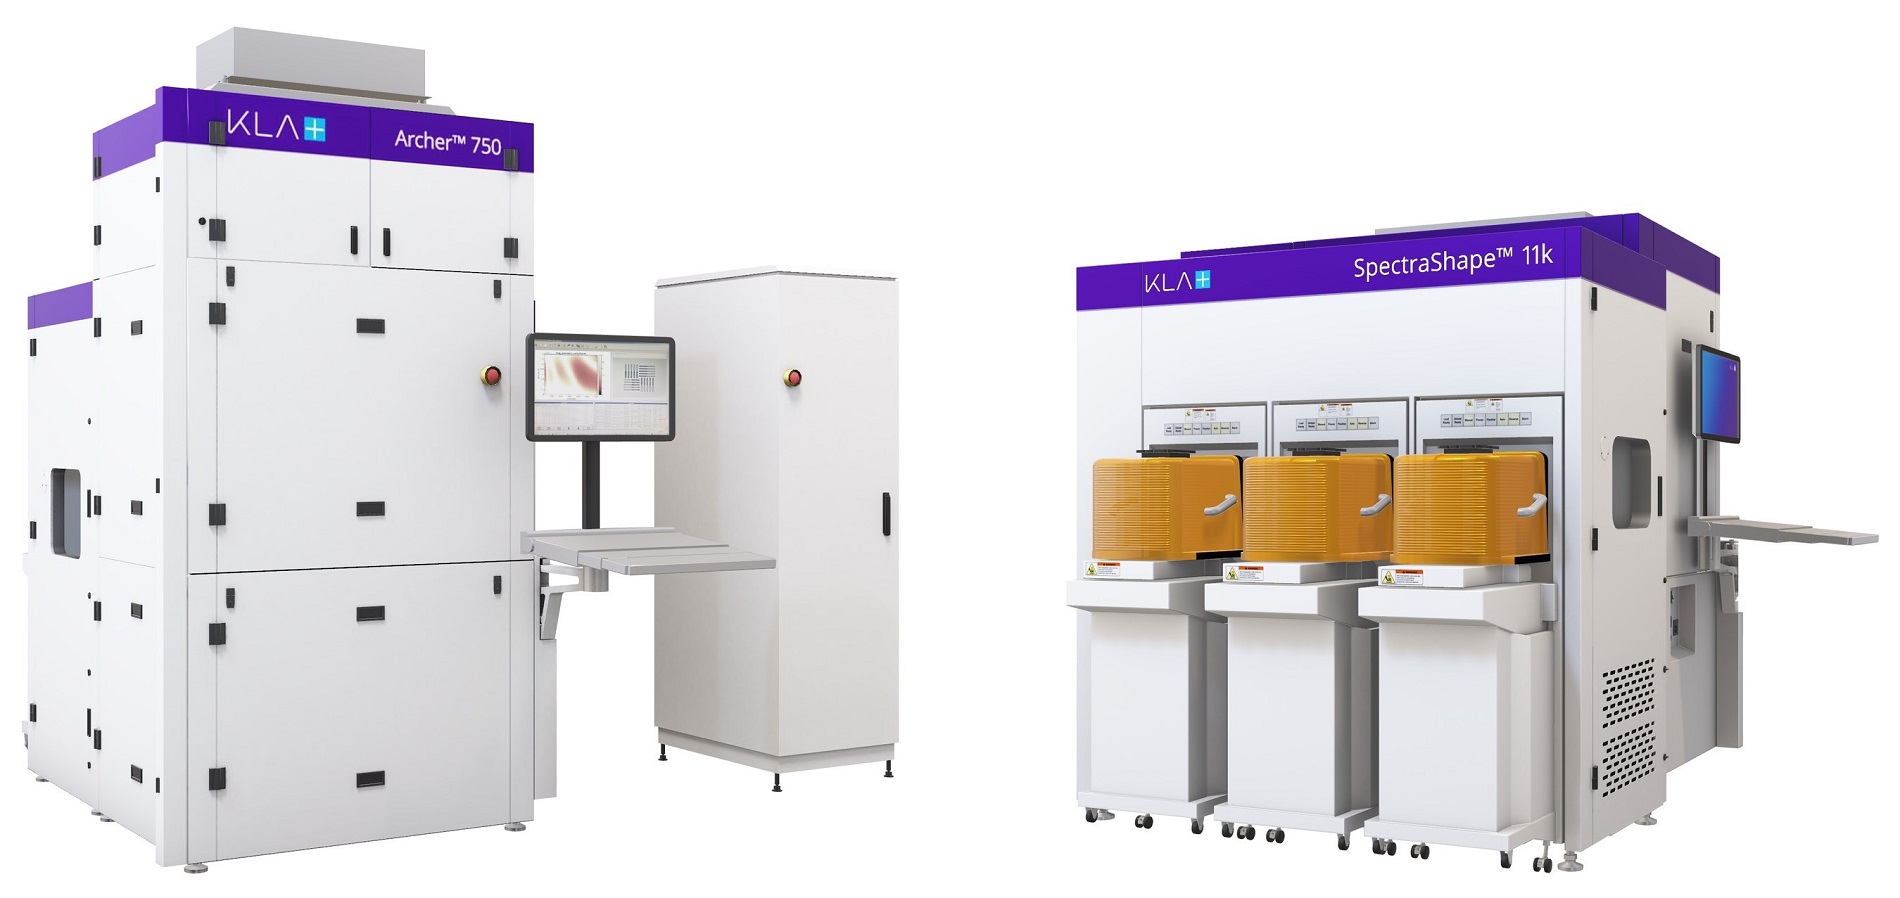 KLA’s new Archer™ 750 overlay metrology system and SpectraShape™ 11k CD and shape metrology system support measurement and control of critical patterning parameters for leading-edge logic, DRAM and 3D NAND devices.